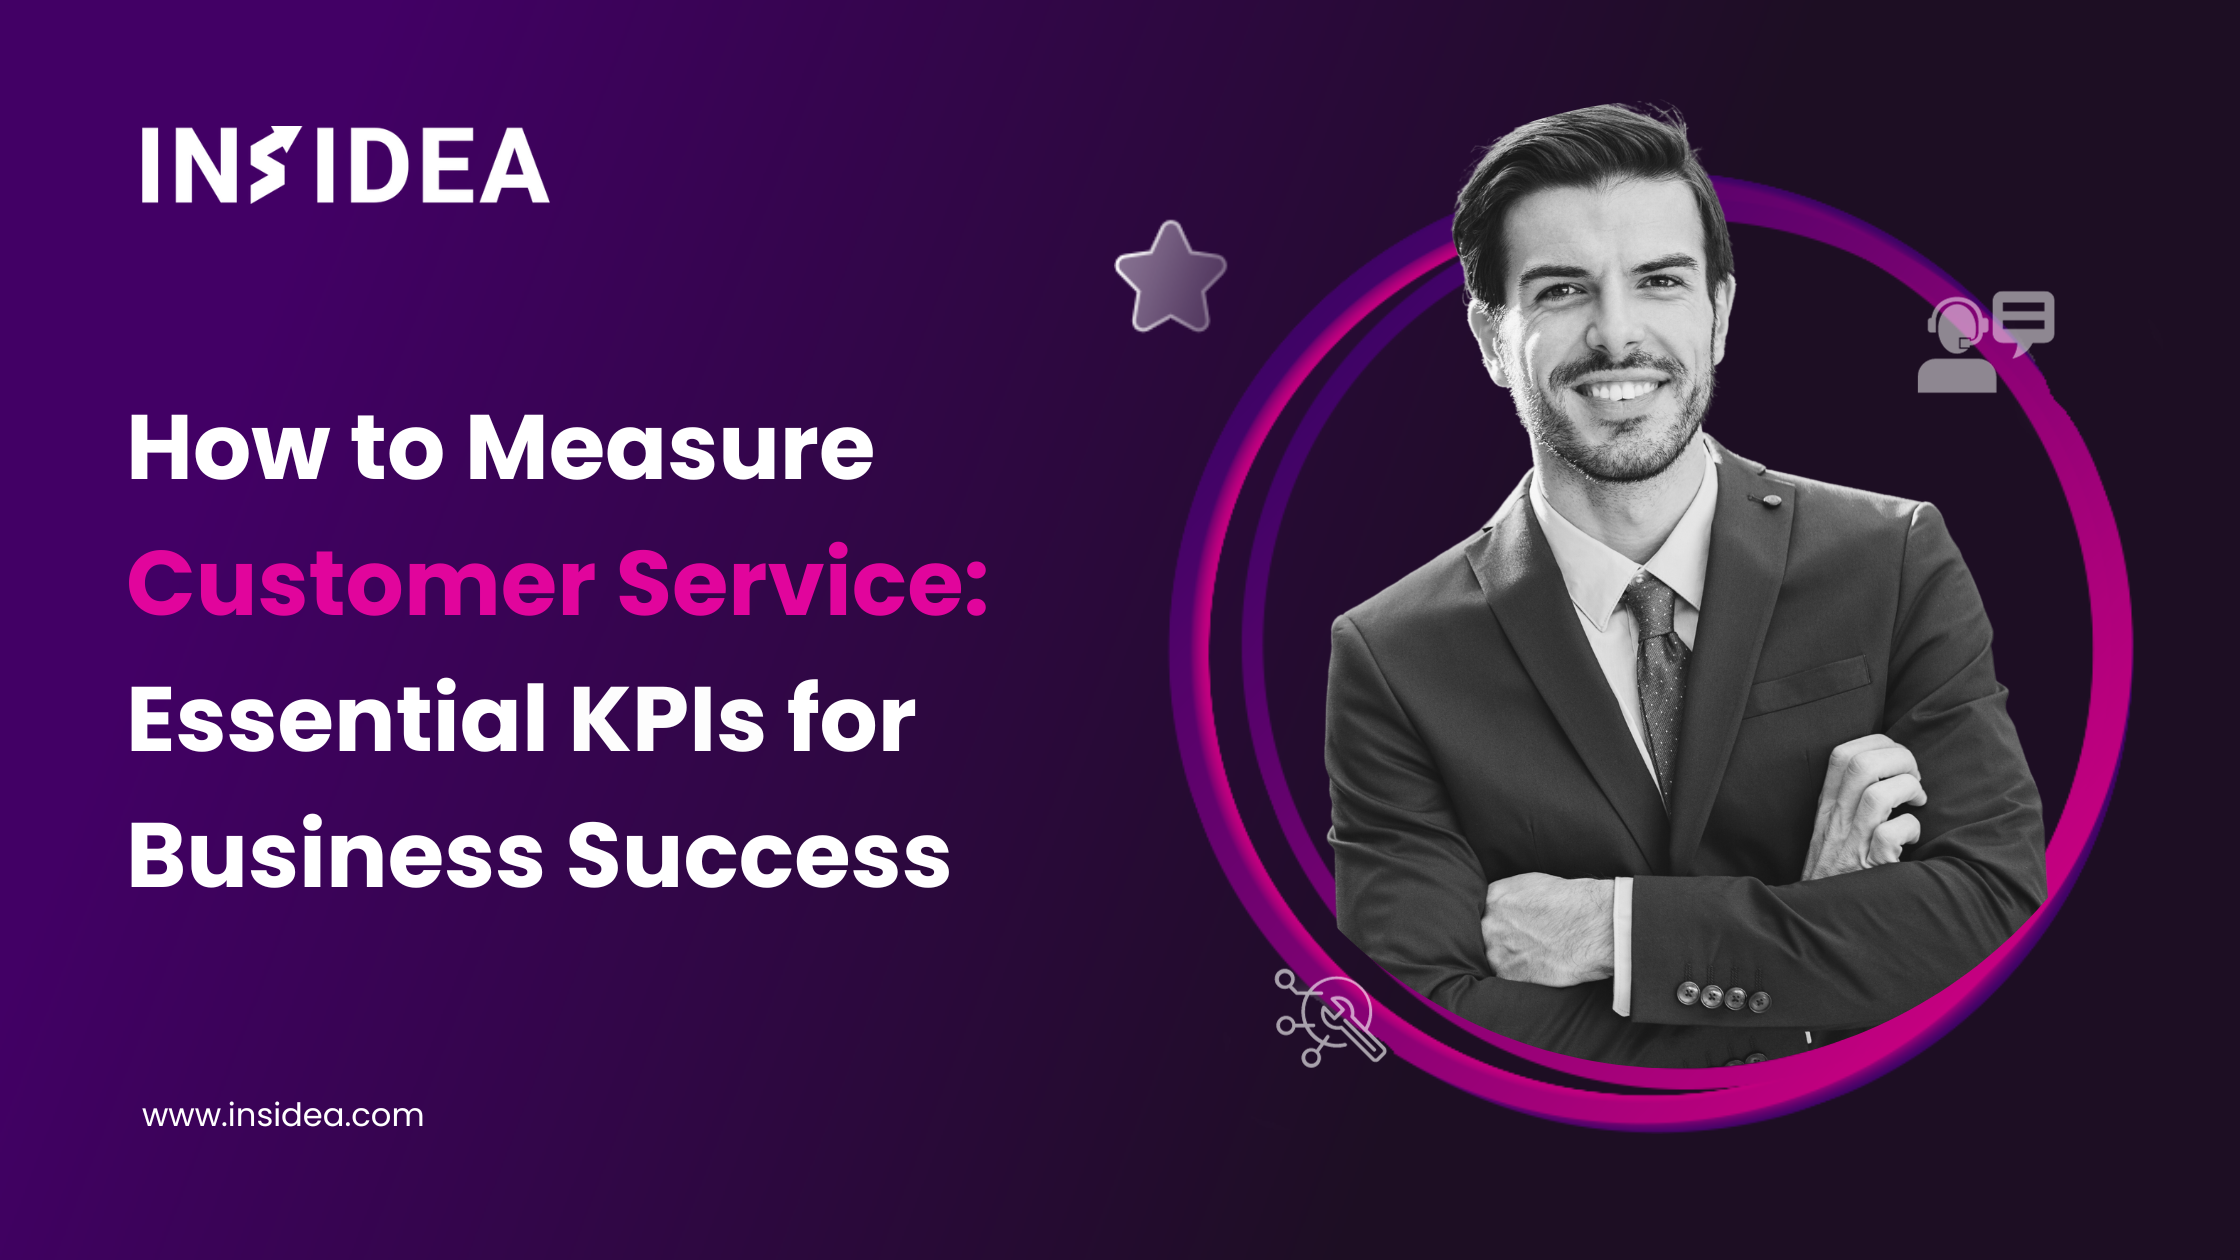 How to Measure Customer Service Essential KPIs for Business Success